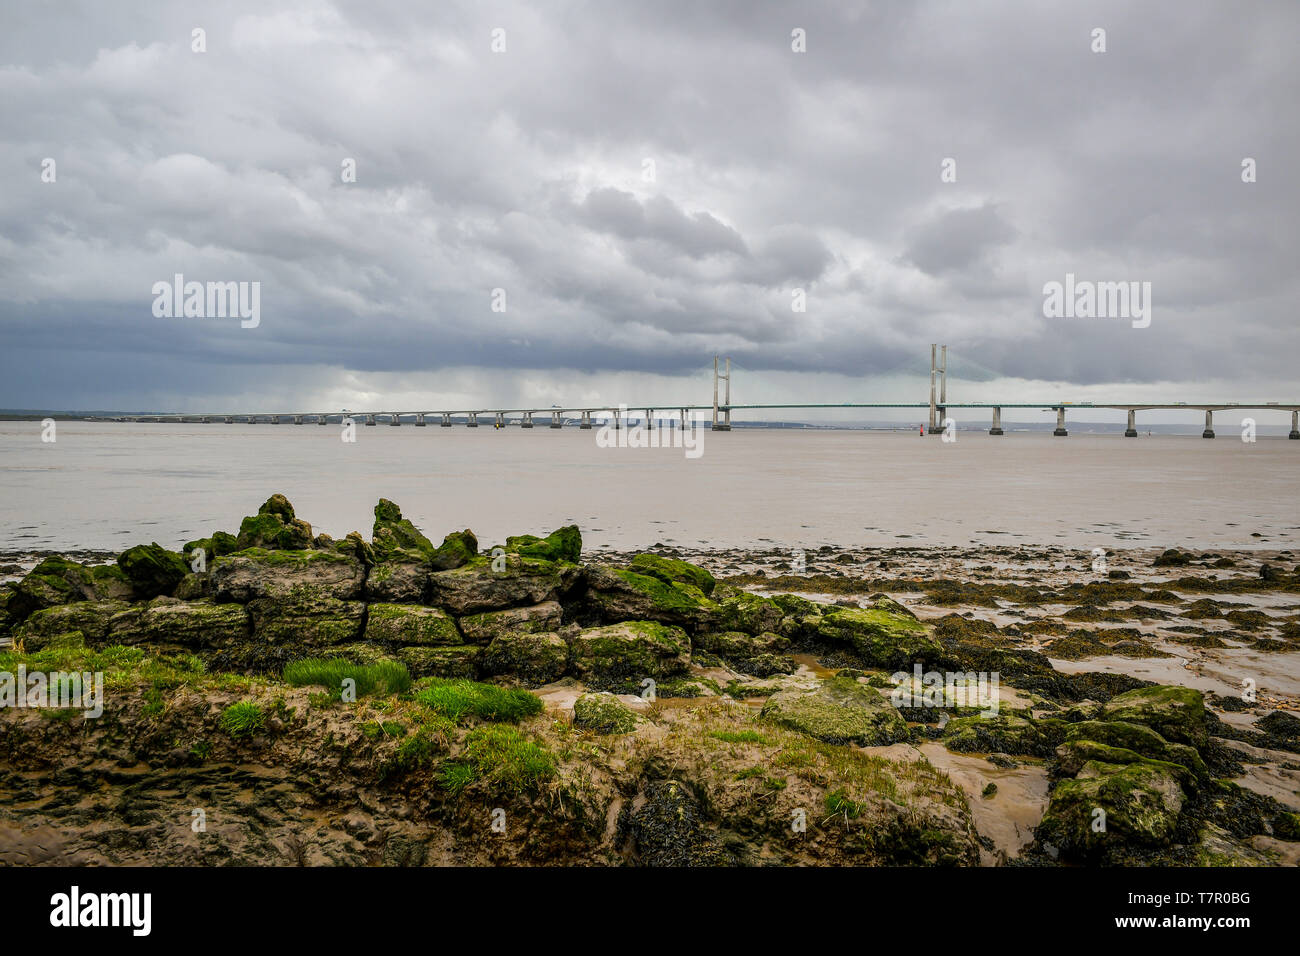 Storm clouds brood over the Prince of Wales Bridge in the Severn Estuary, as Britain is set to be hit with thunderstorms and heavy rain this week. Stock Photo